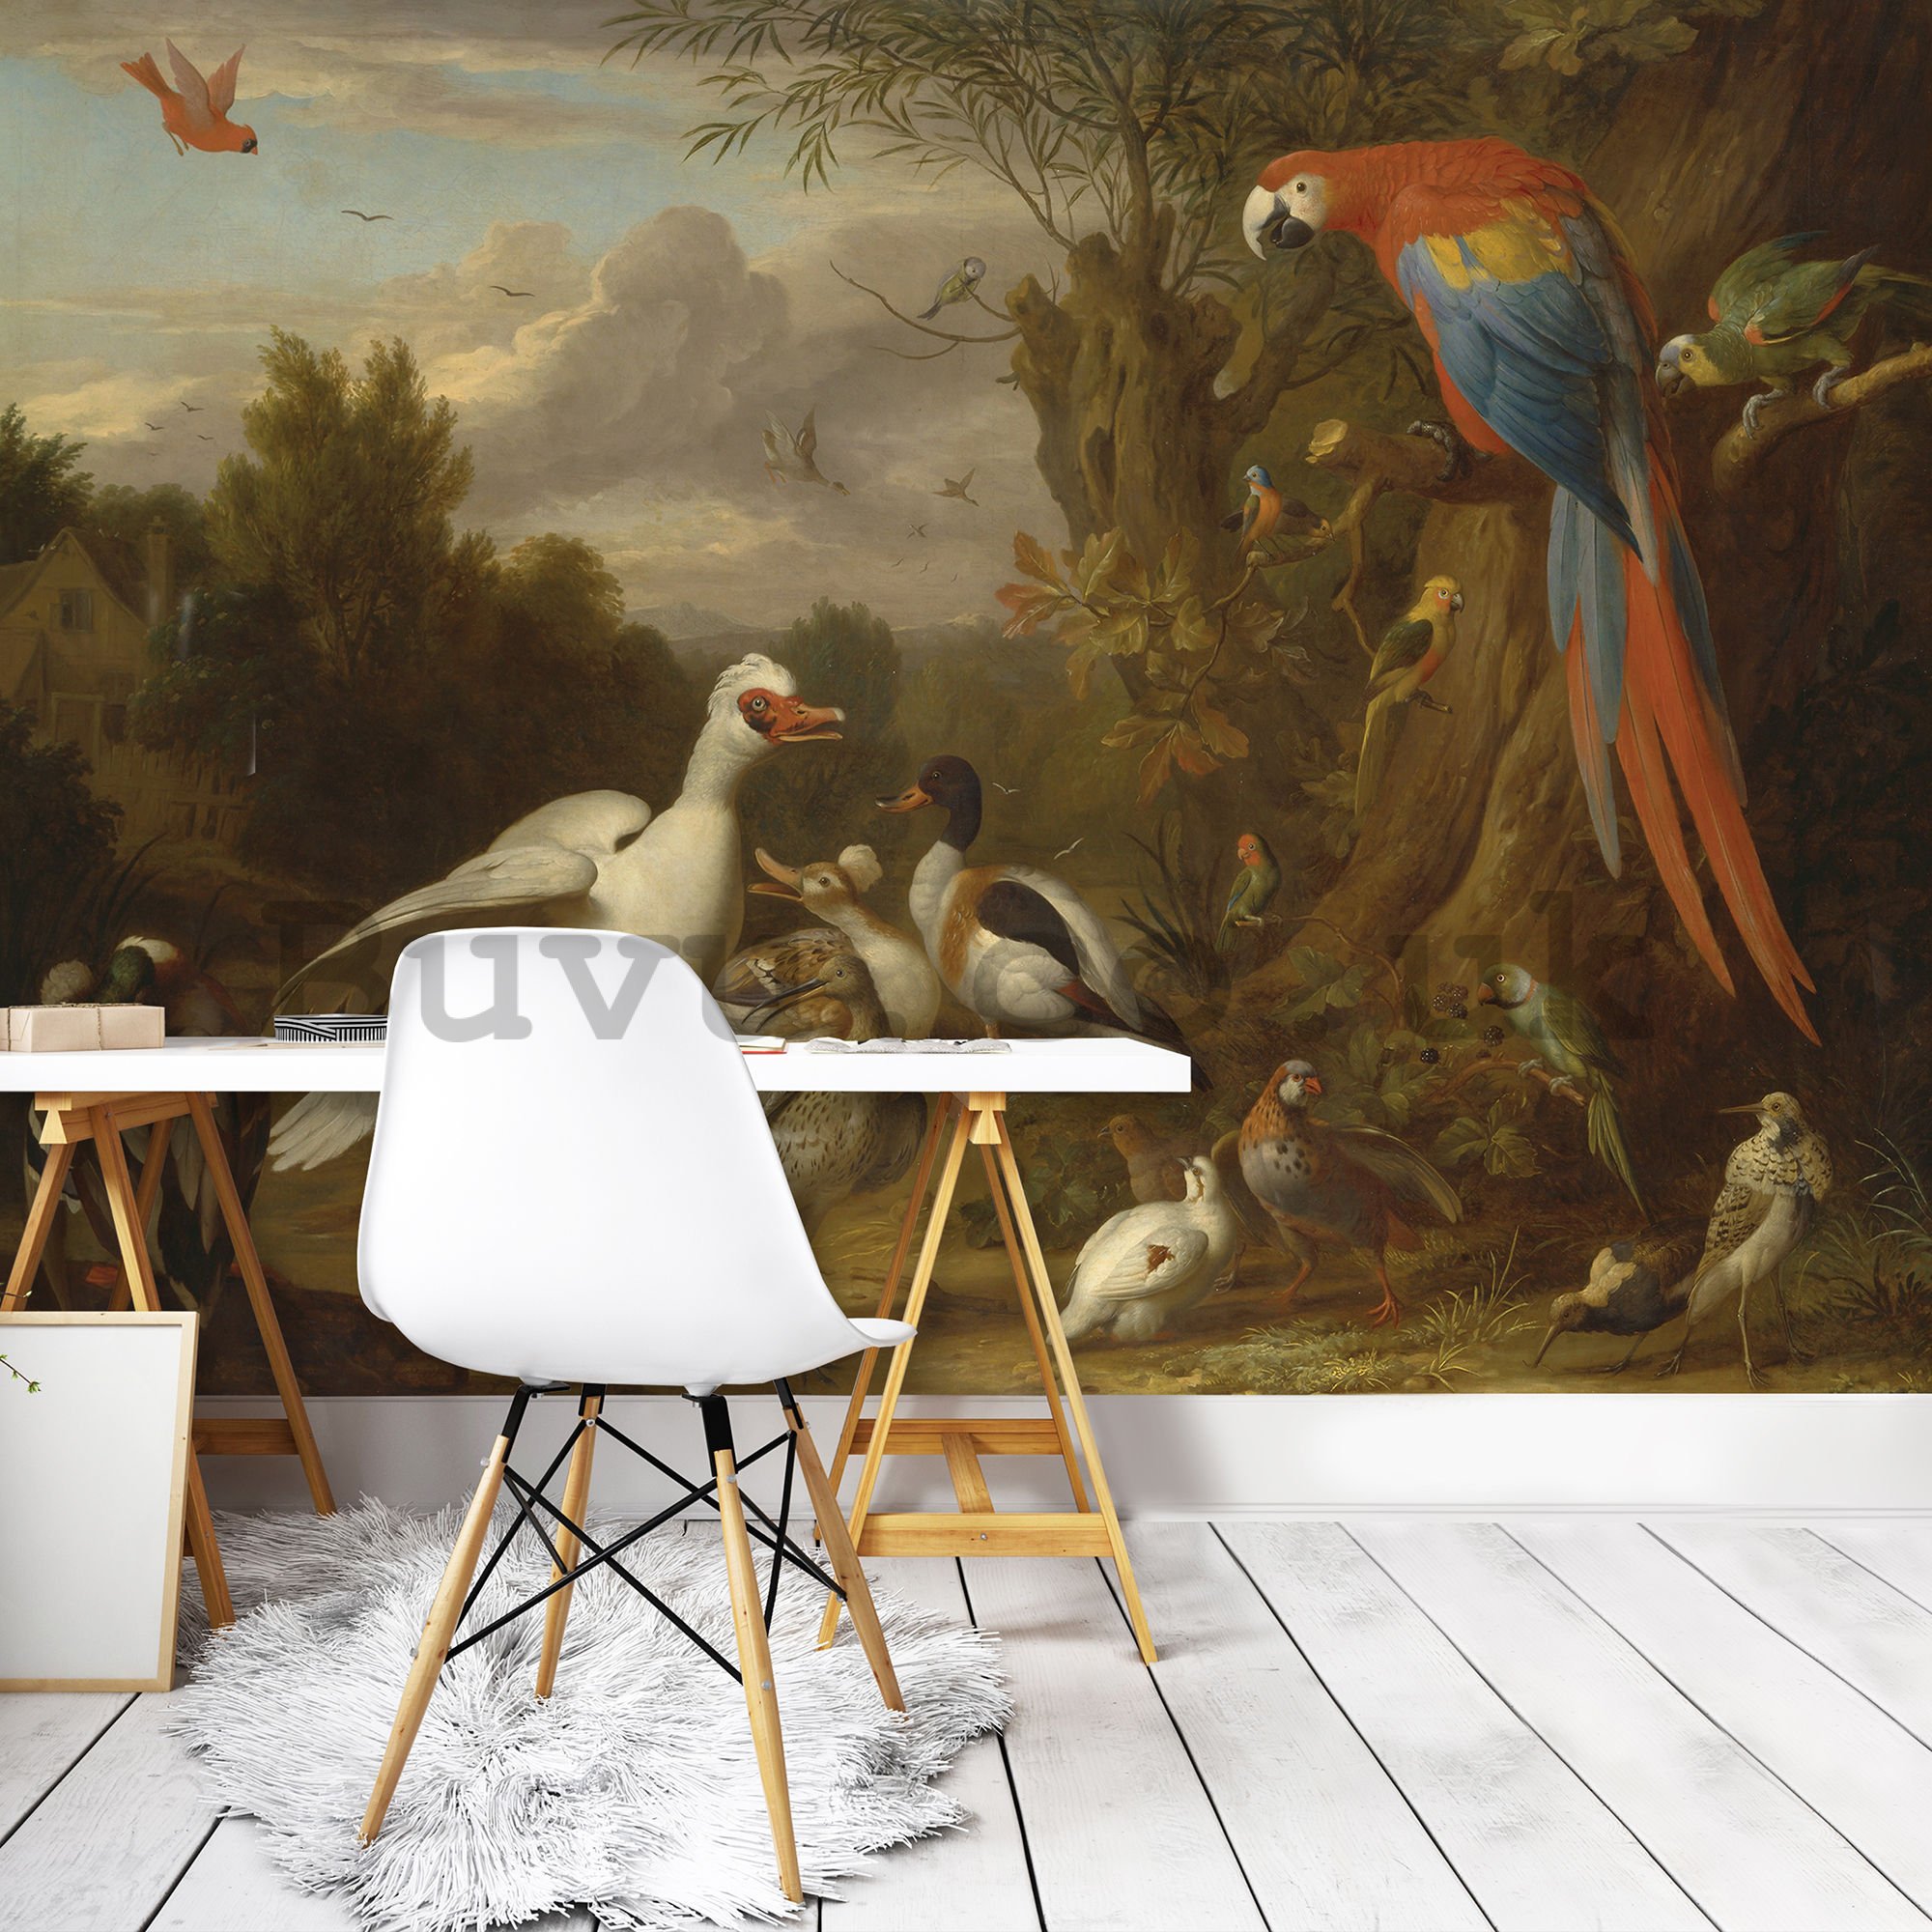 Wall mural: Ducks, Parrots, and Other Birds in a Landscape - 184x254 cm